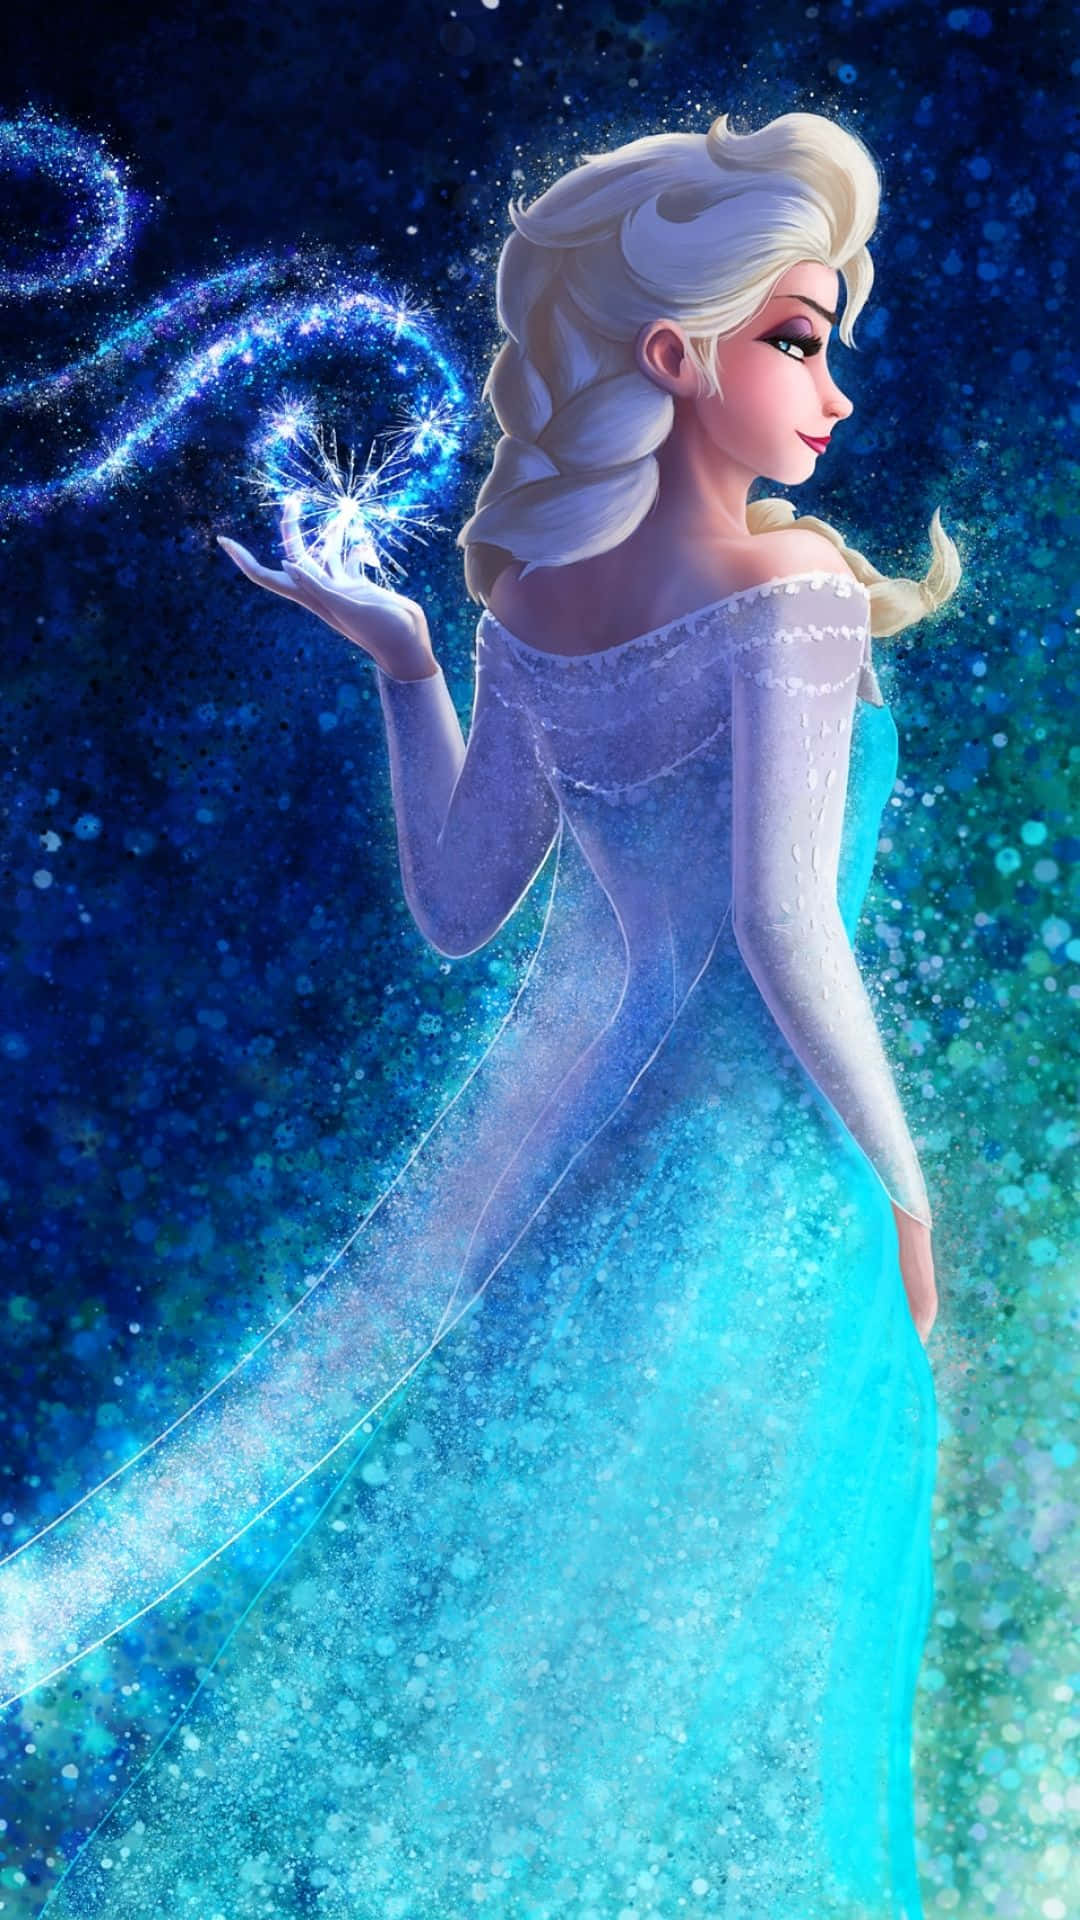 The fabulous Elsa spreading love and joy throughout Arendelle